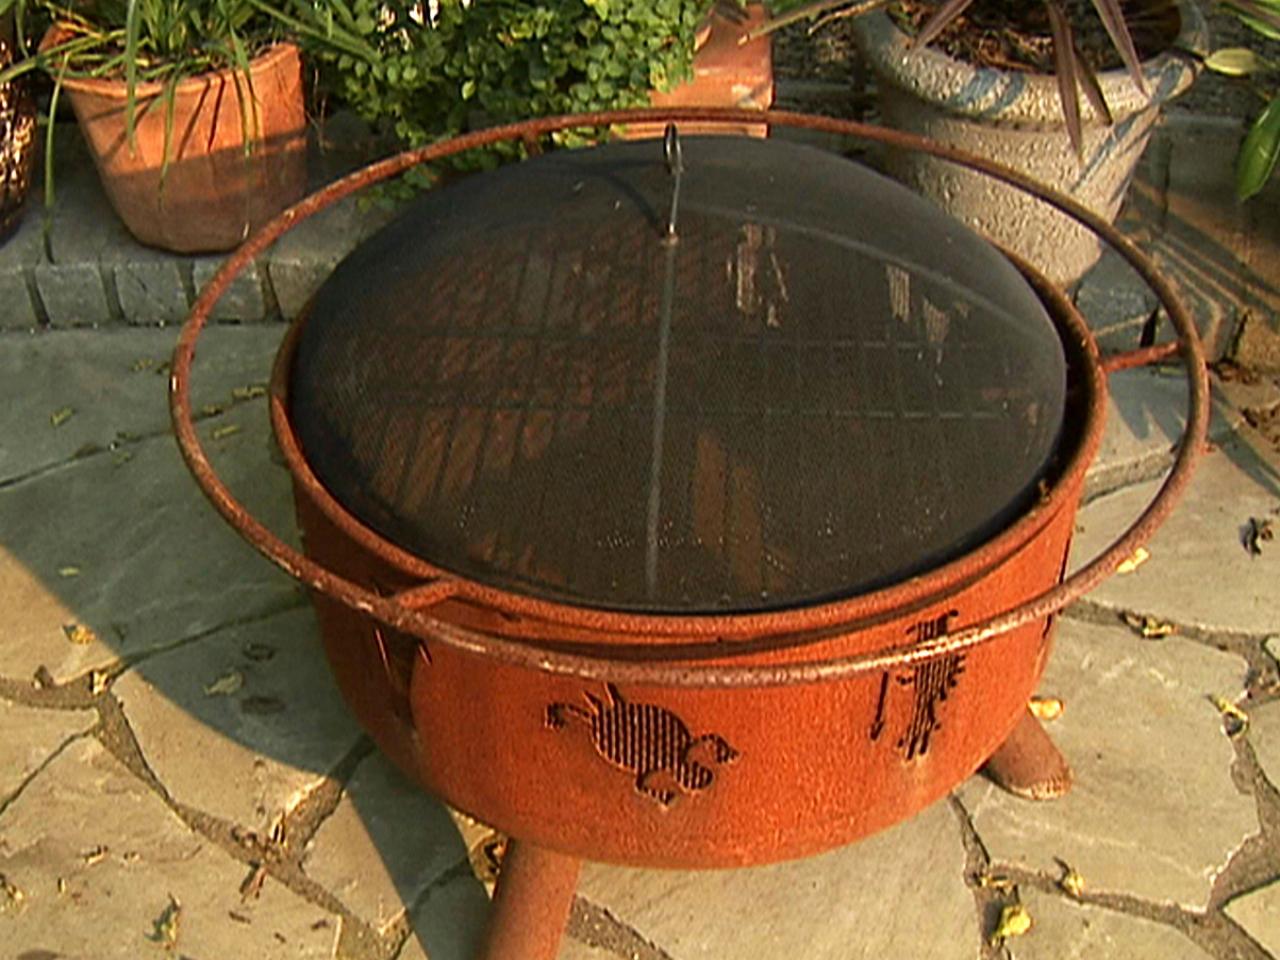 Outdoor Fire Pits And Pit Safety, Metal Fire Pit Bowl Insert